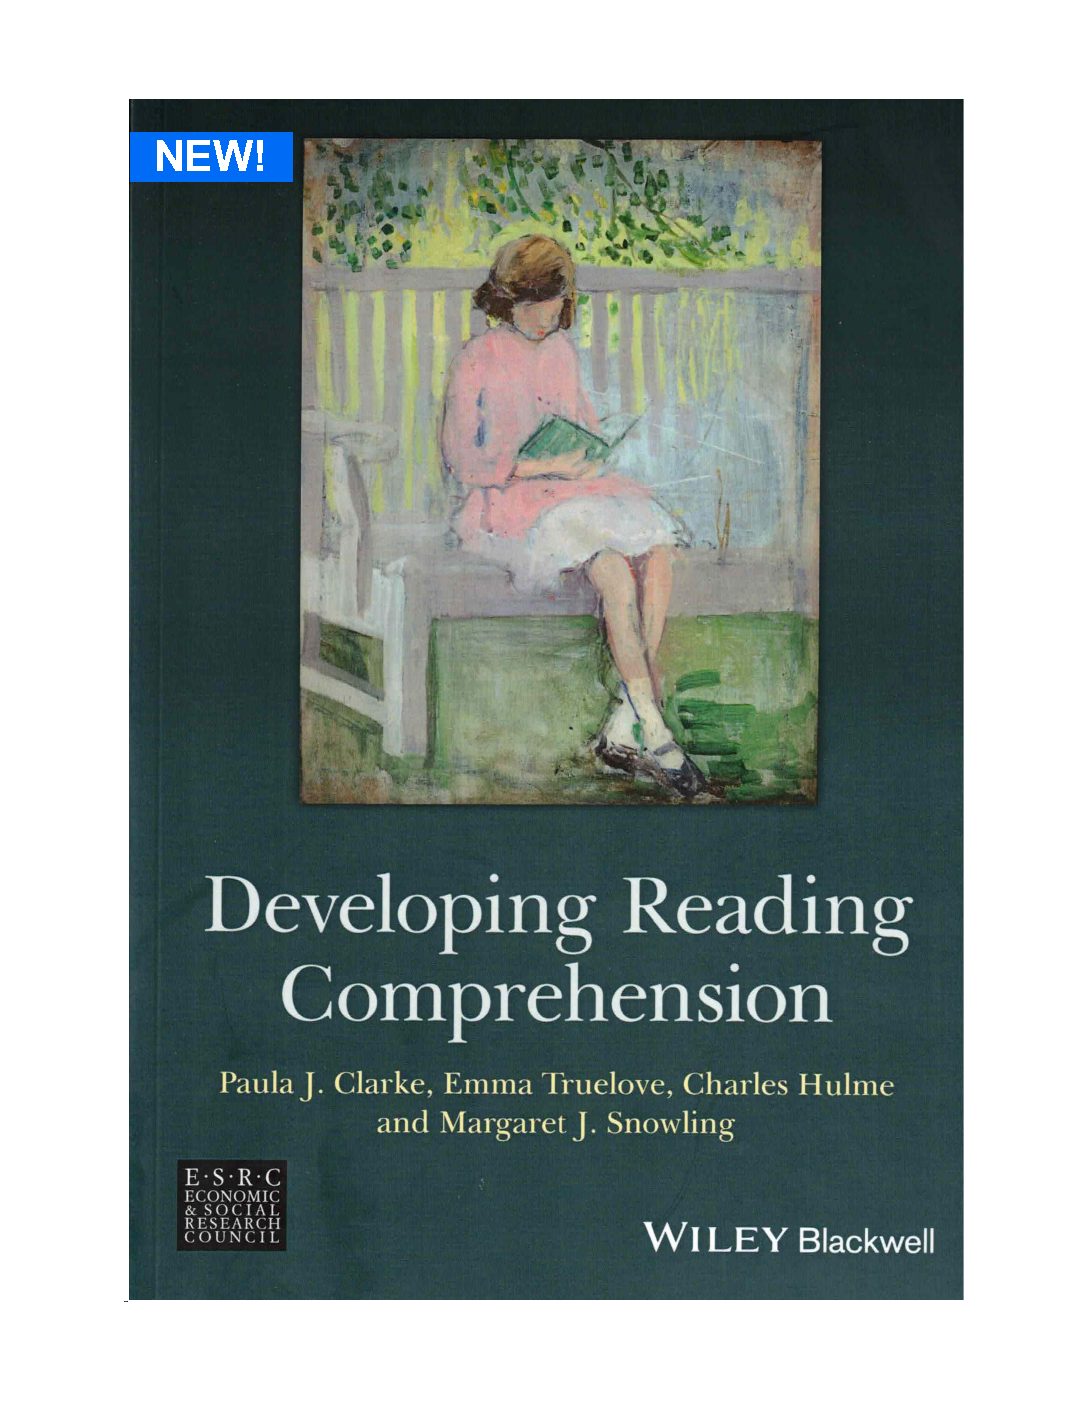 Developing Reading Comprehension PDF *new!